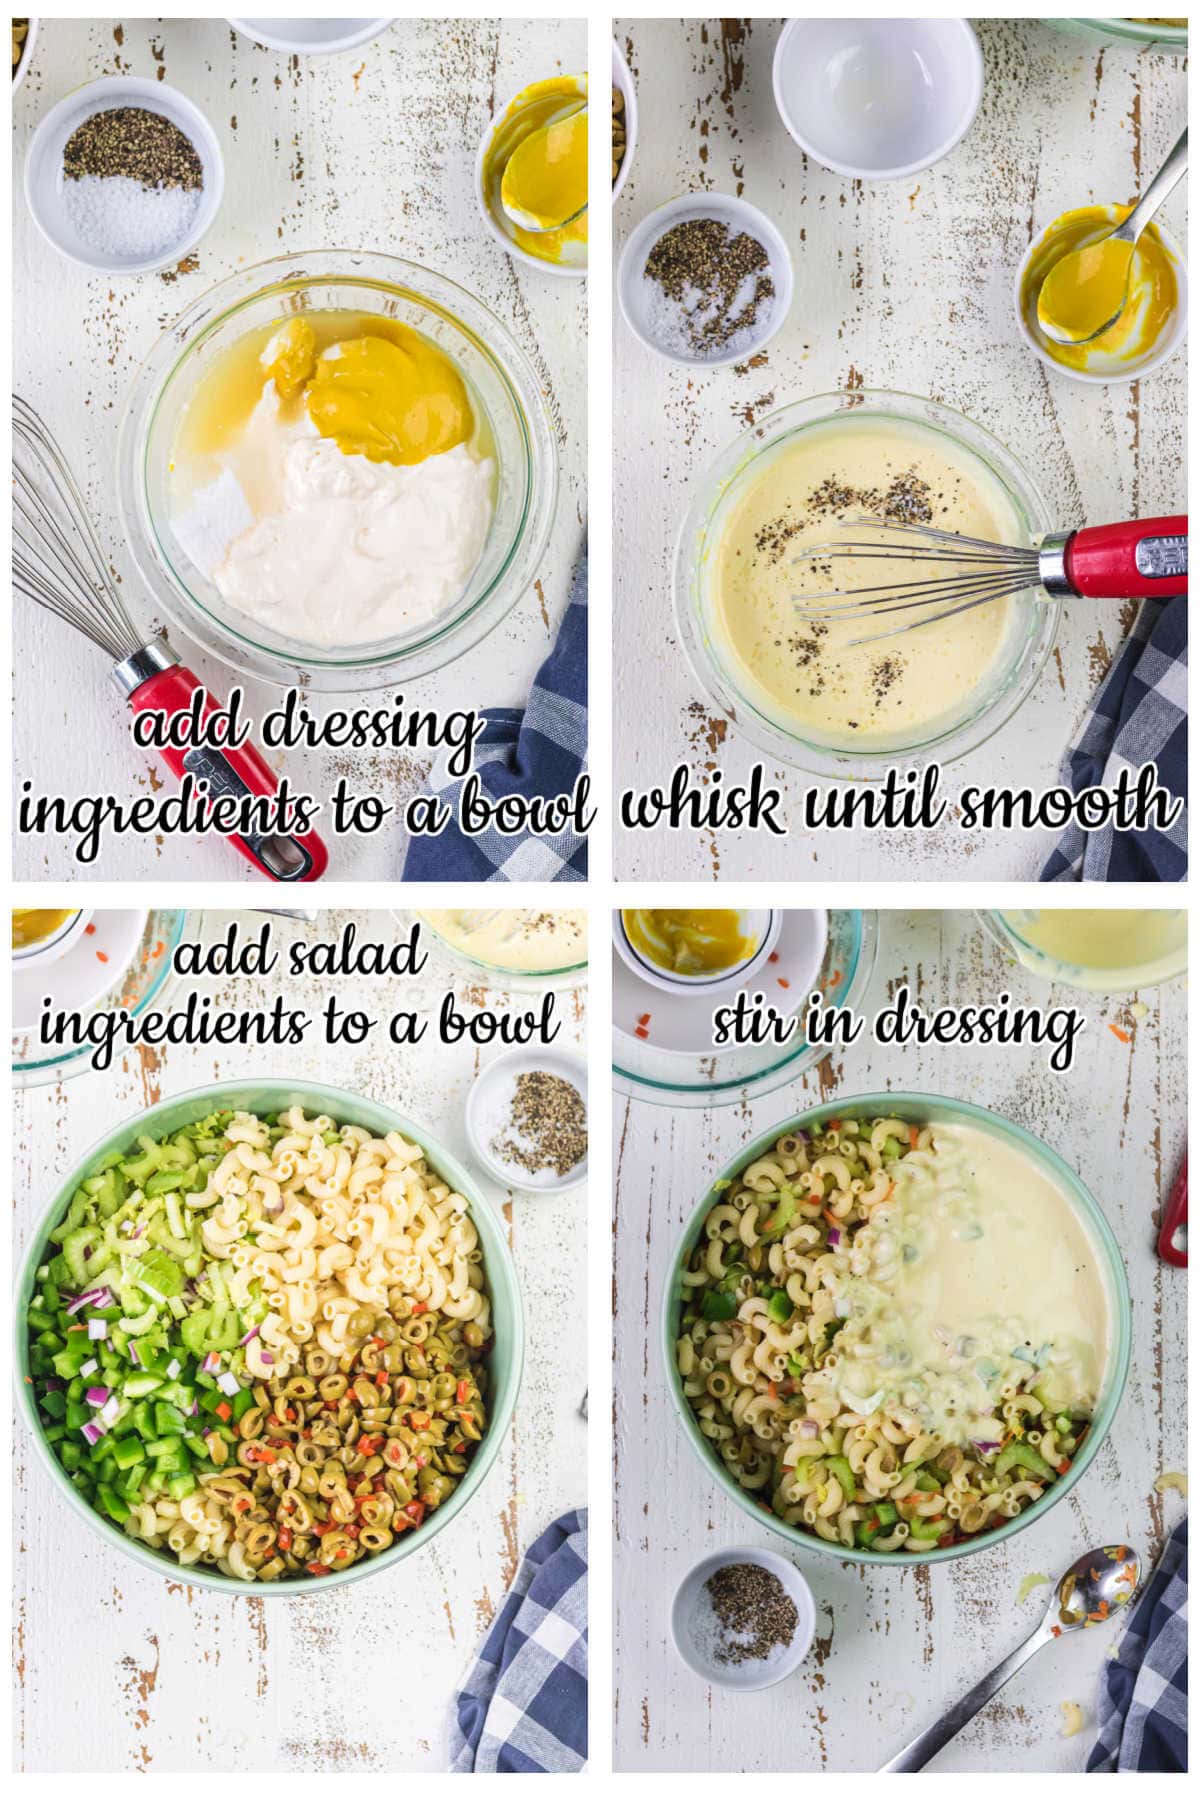 Step by step images of making macaroni salad.